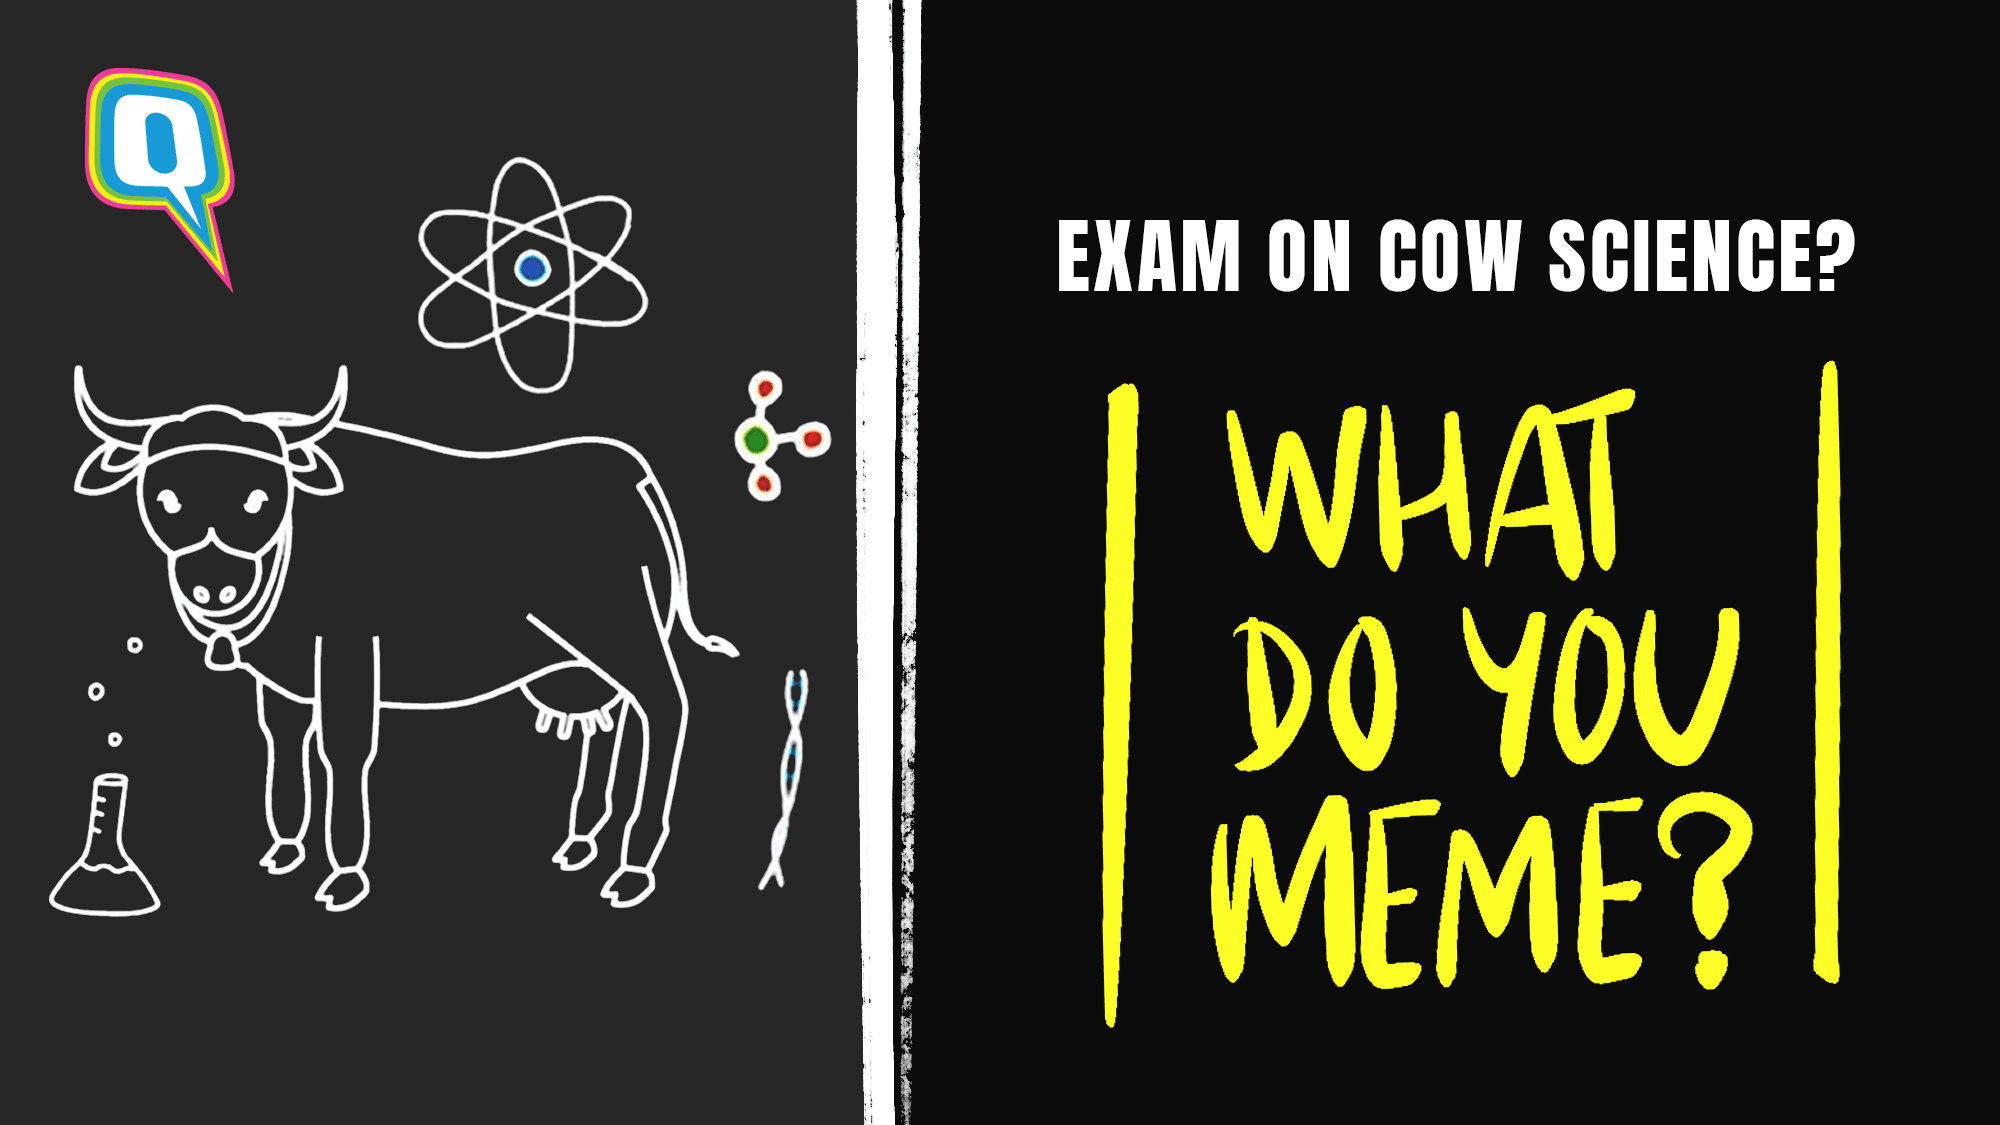 Are you ready to explore the science in cows?